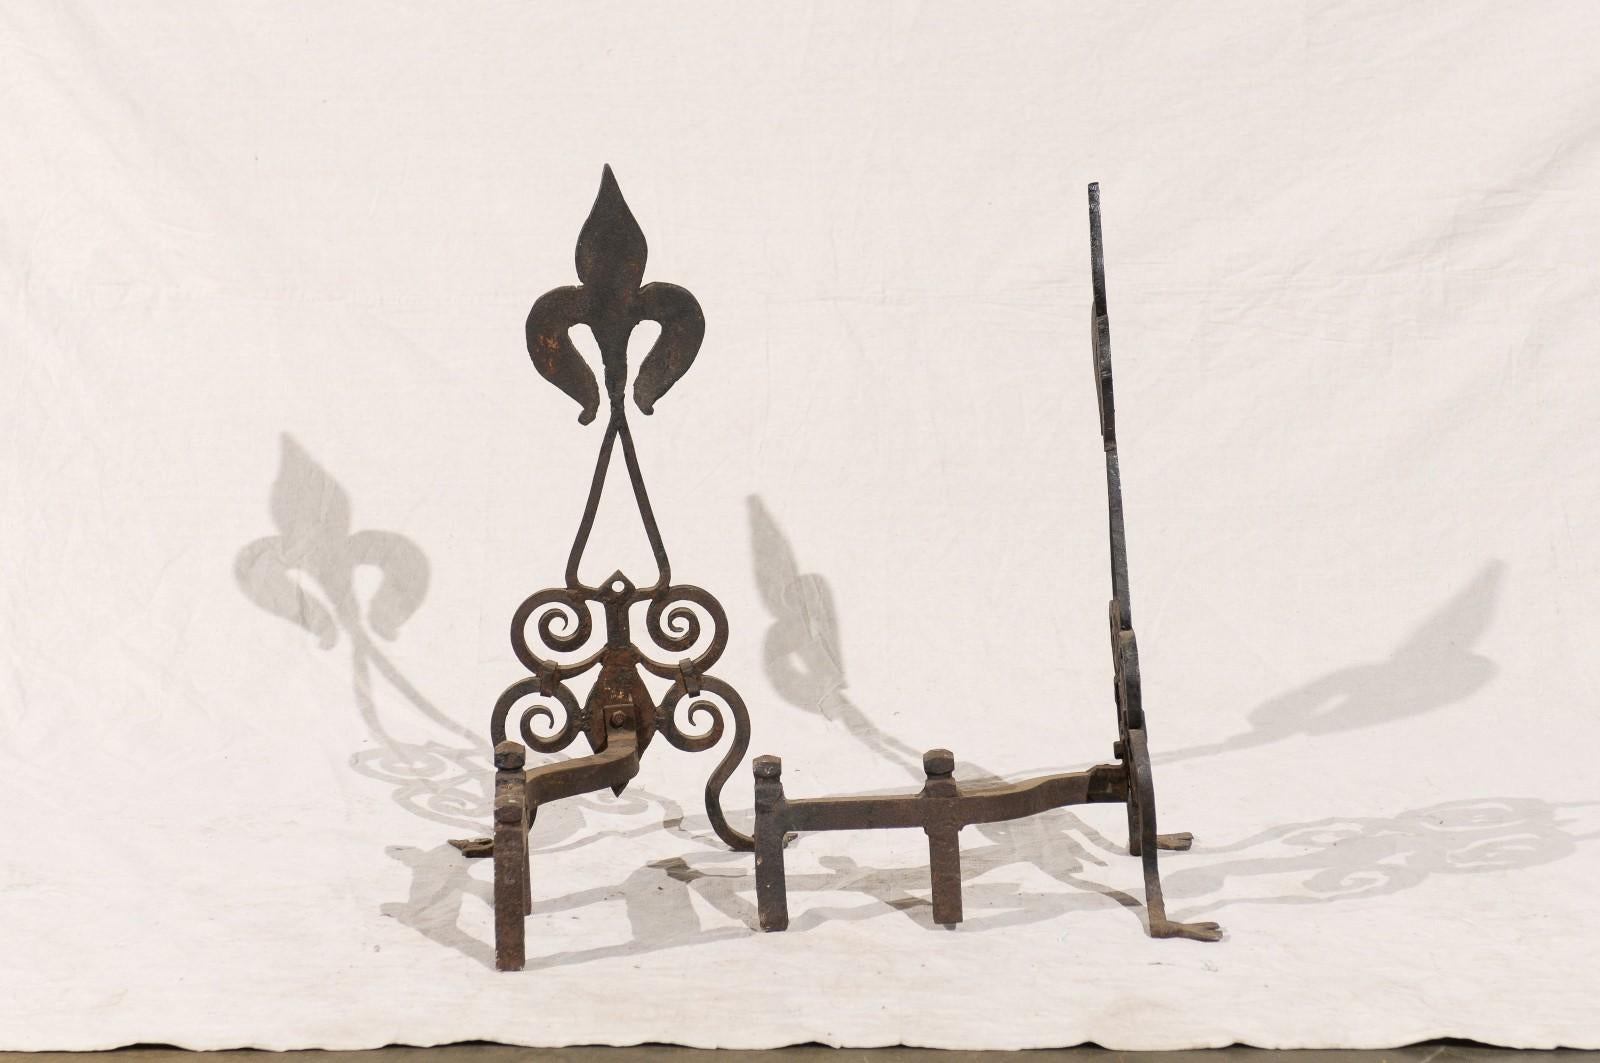 Pair of Late 19th-Early 20th Century American Black Fleur-de-Lis Andirons For Sale 1